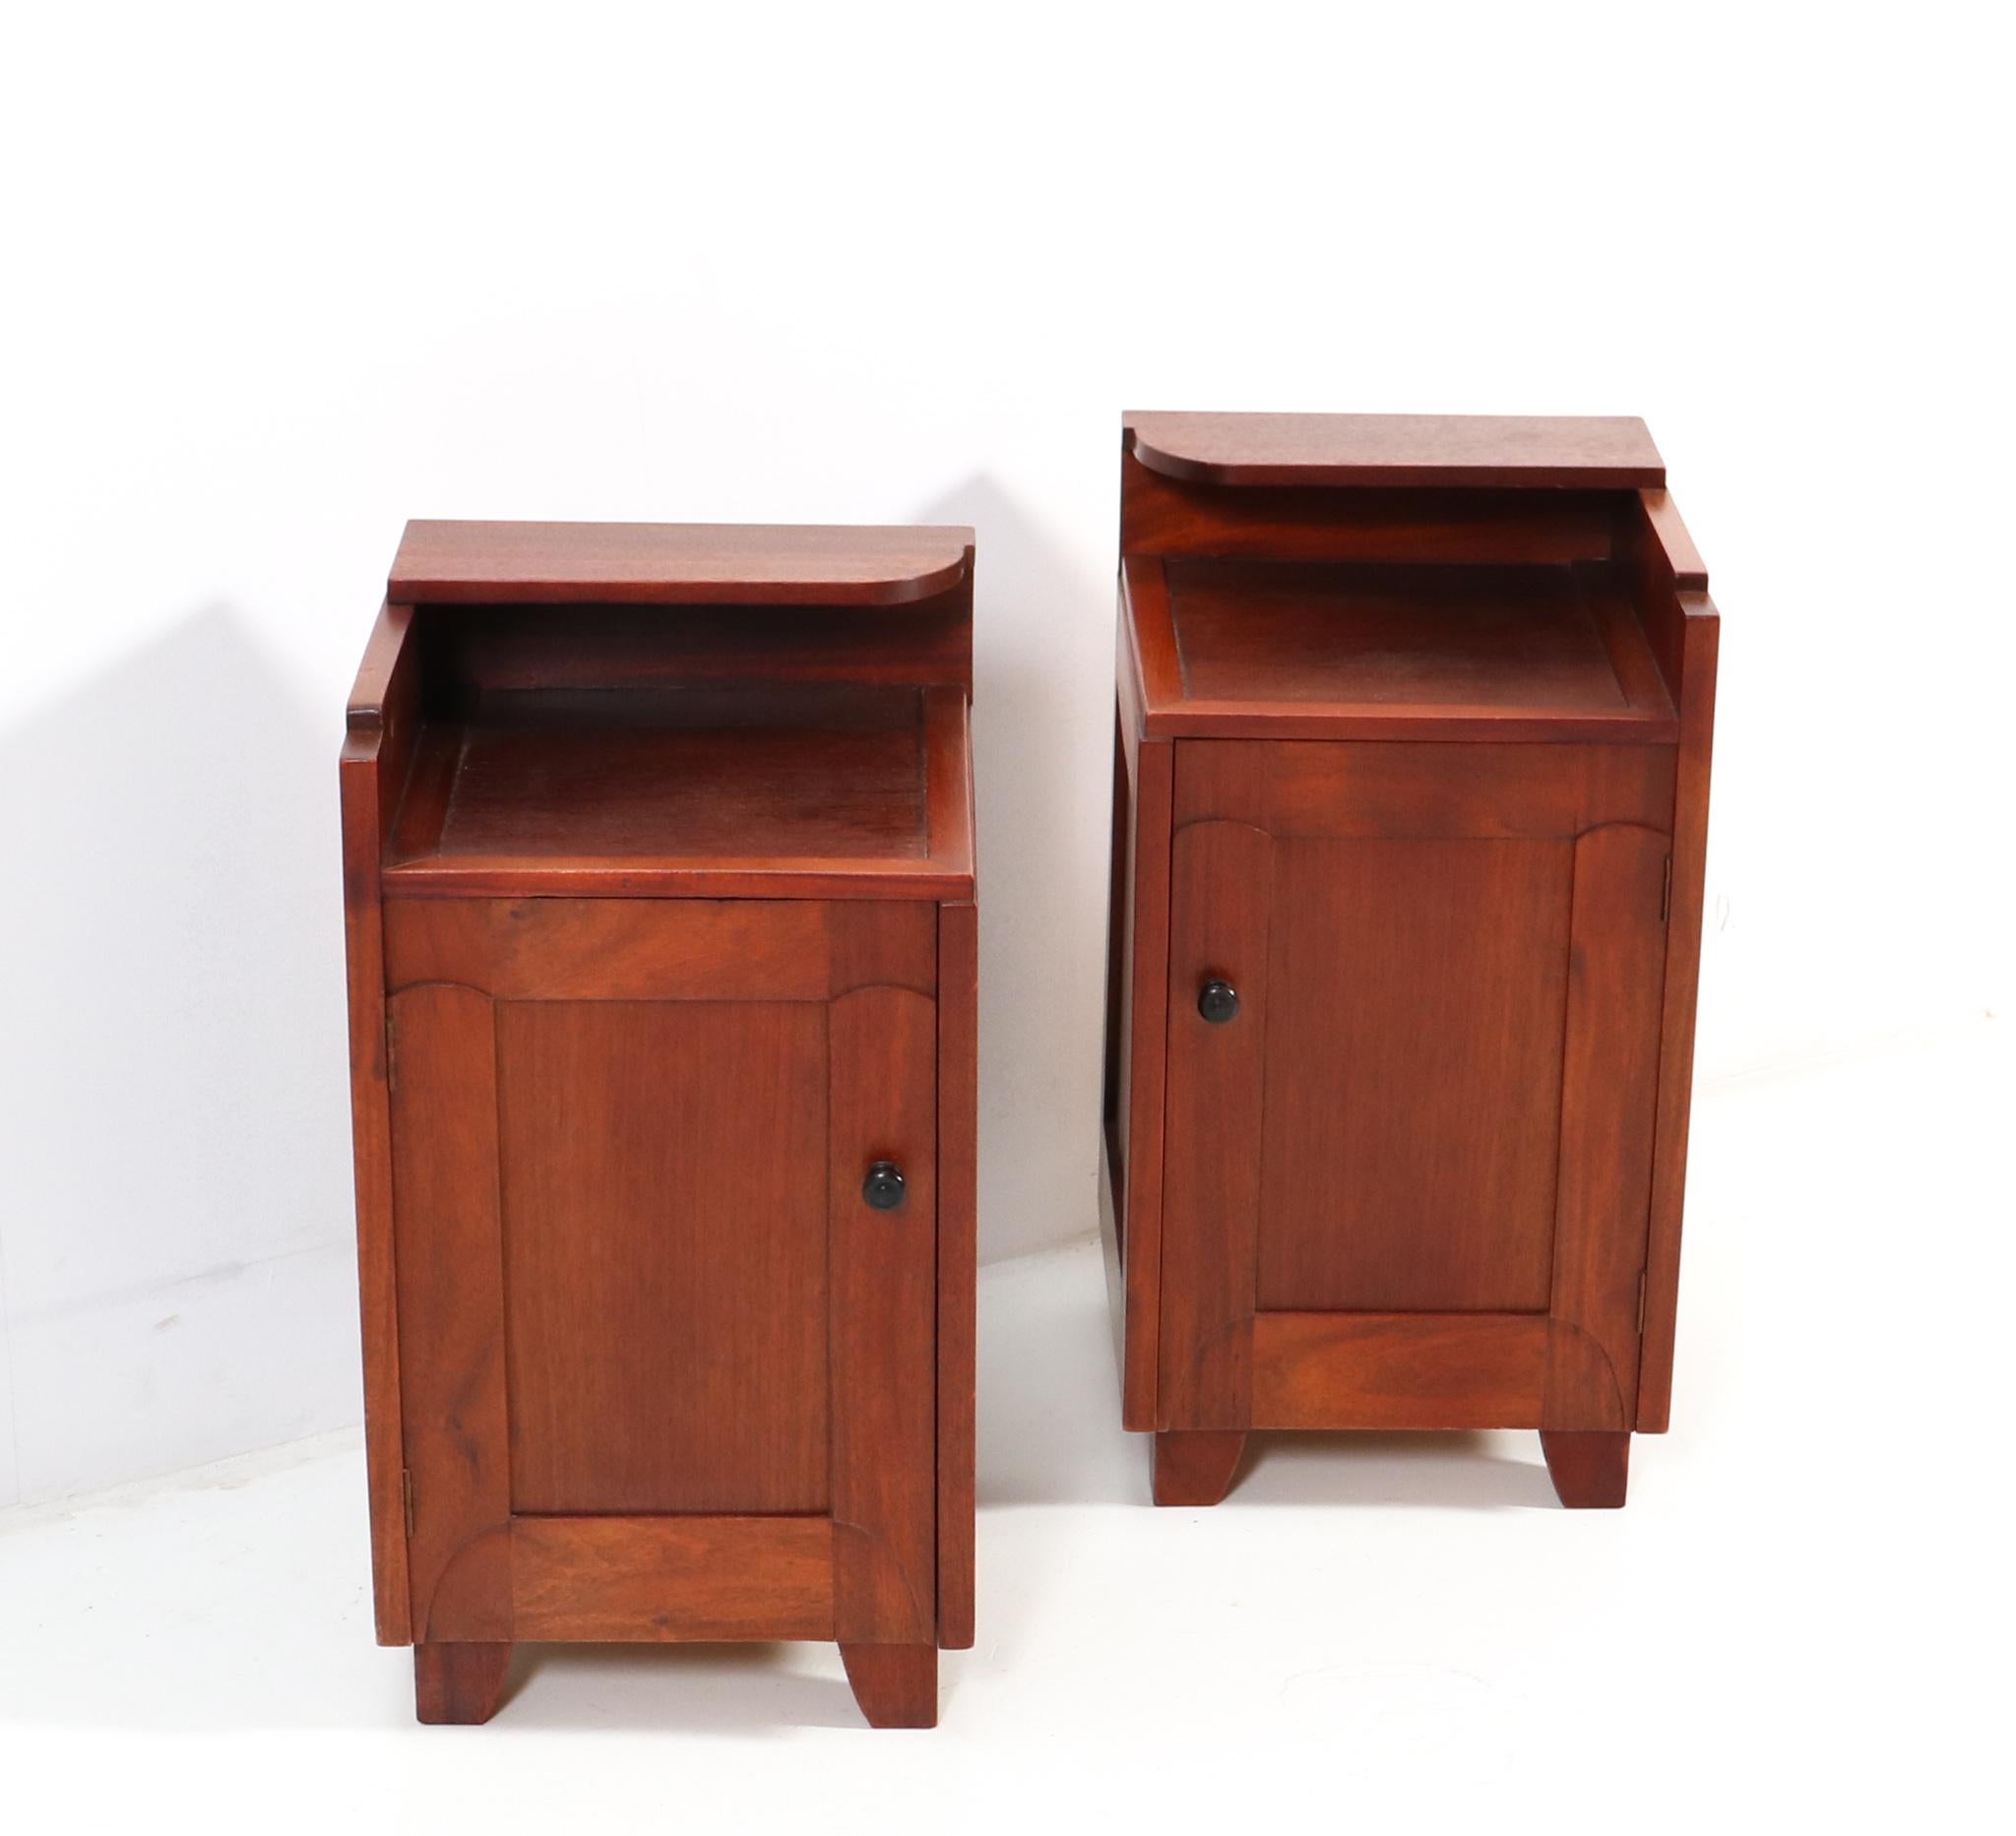 Early 20th Century Two Walnut Art Deco Amsterdamse School Nightstands or Bedside Tables, 1920s